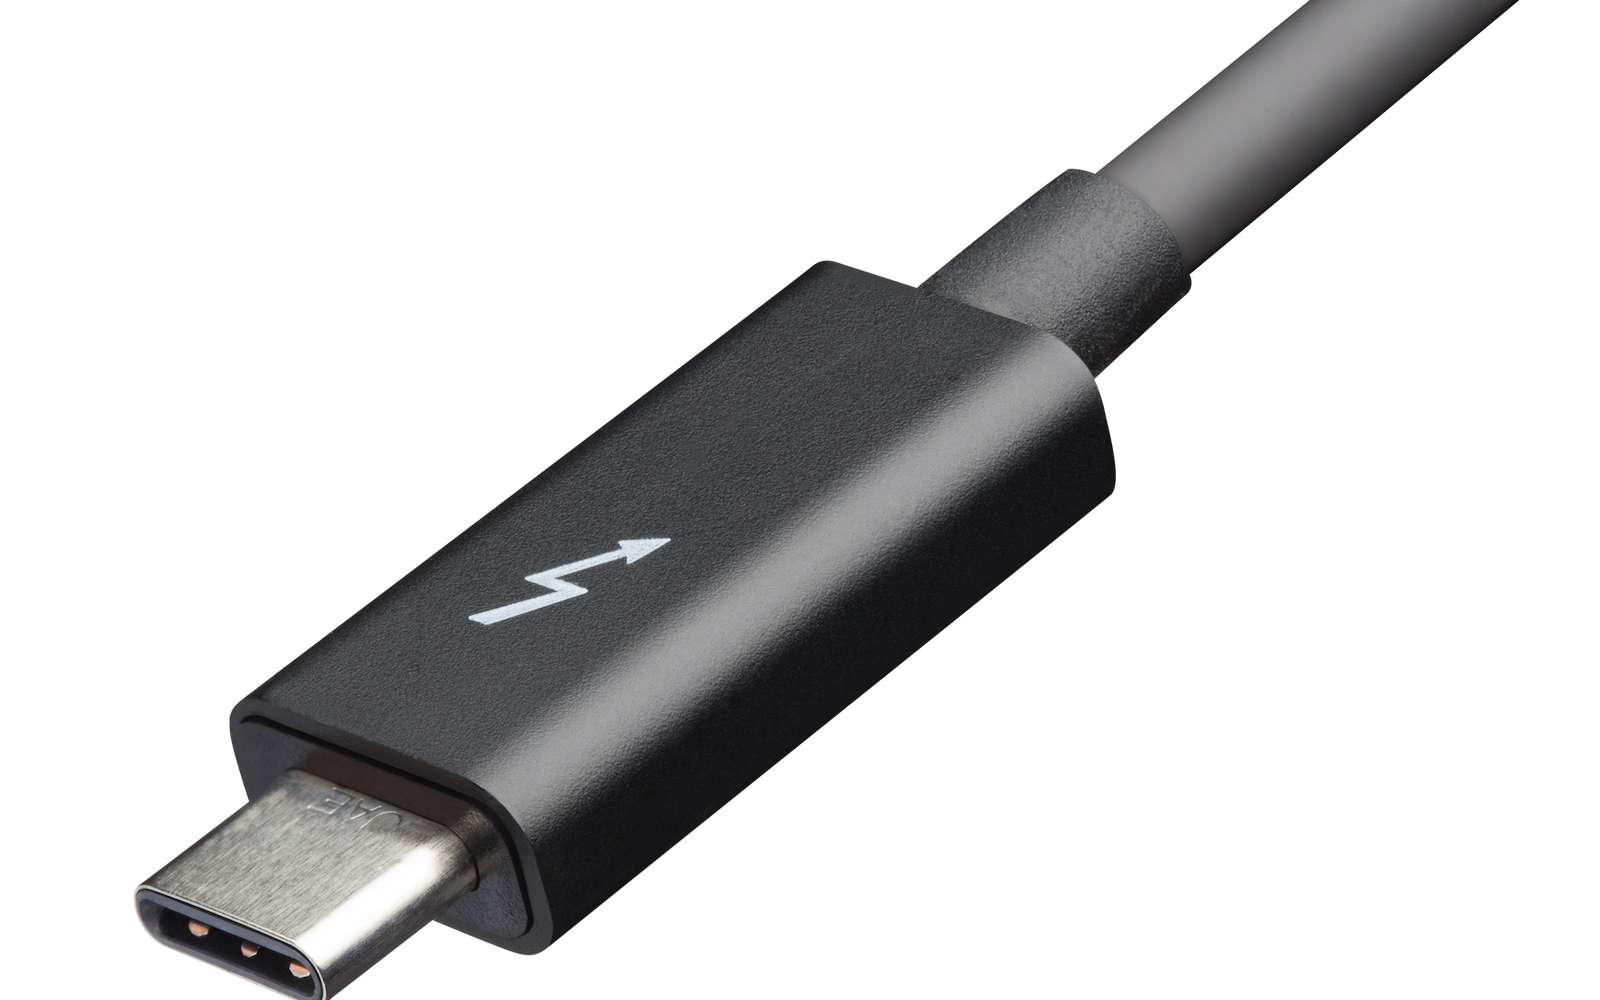 Photo of USB4 device connected to a Thunderbolt 3 device